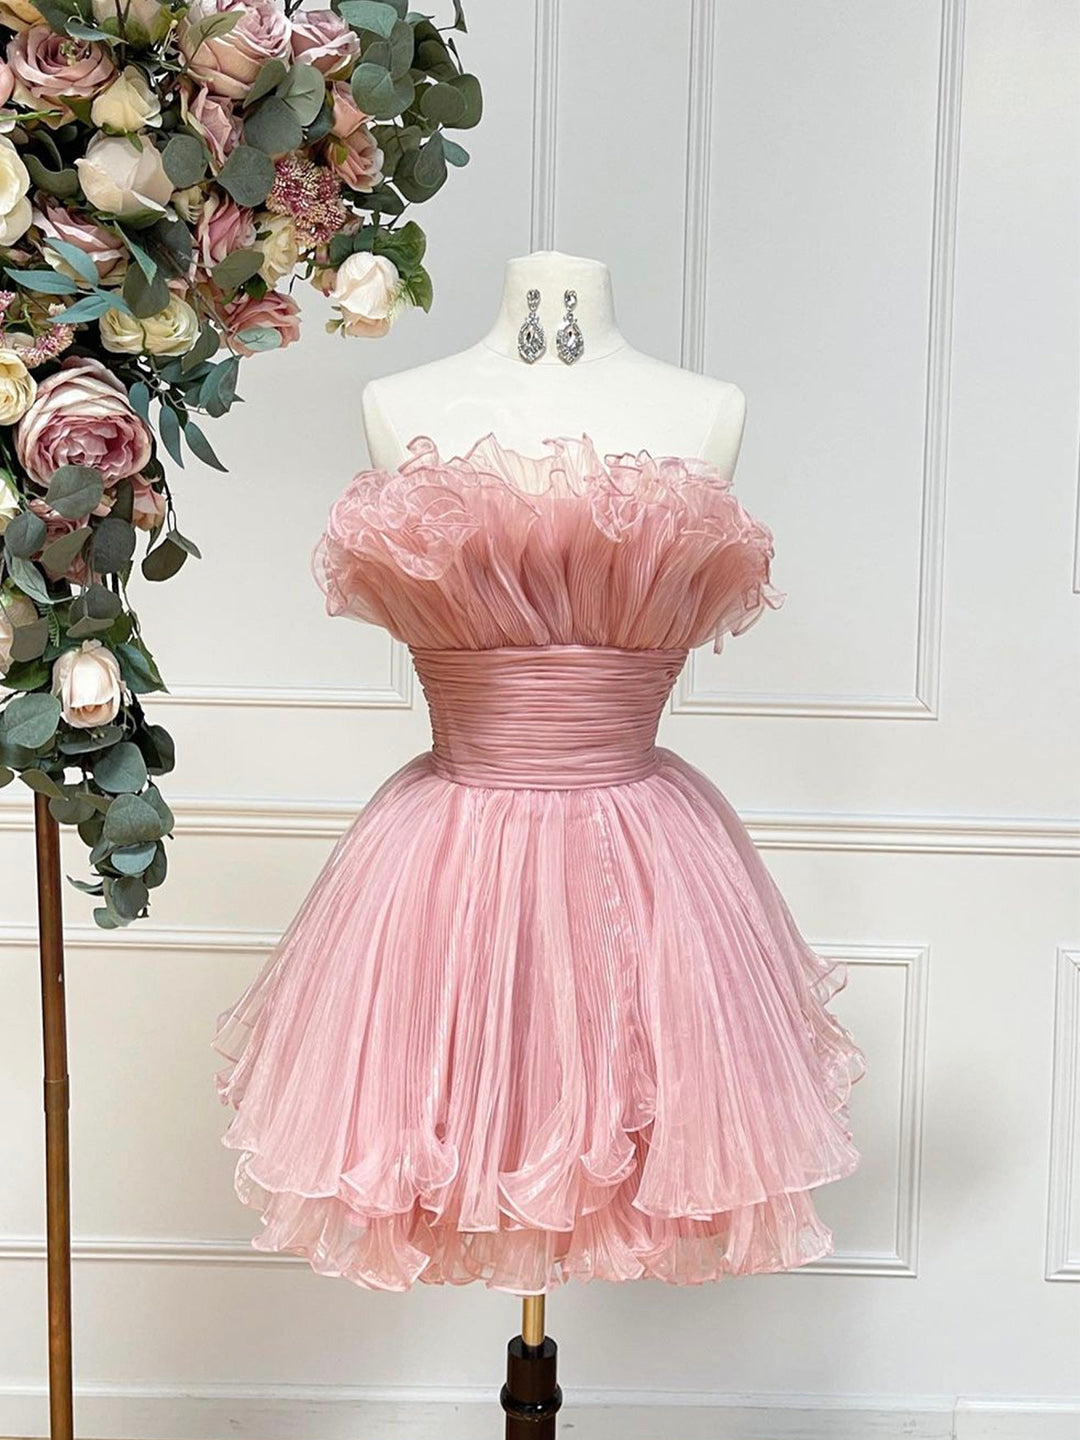 Pink Strapless Tulle Short Corset Prom Dress, Cute A-Line Corset Homecoming Dress outfit, Bridesmaid Dresses Design